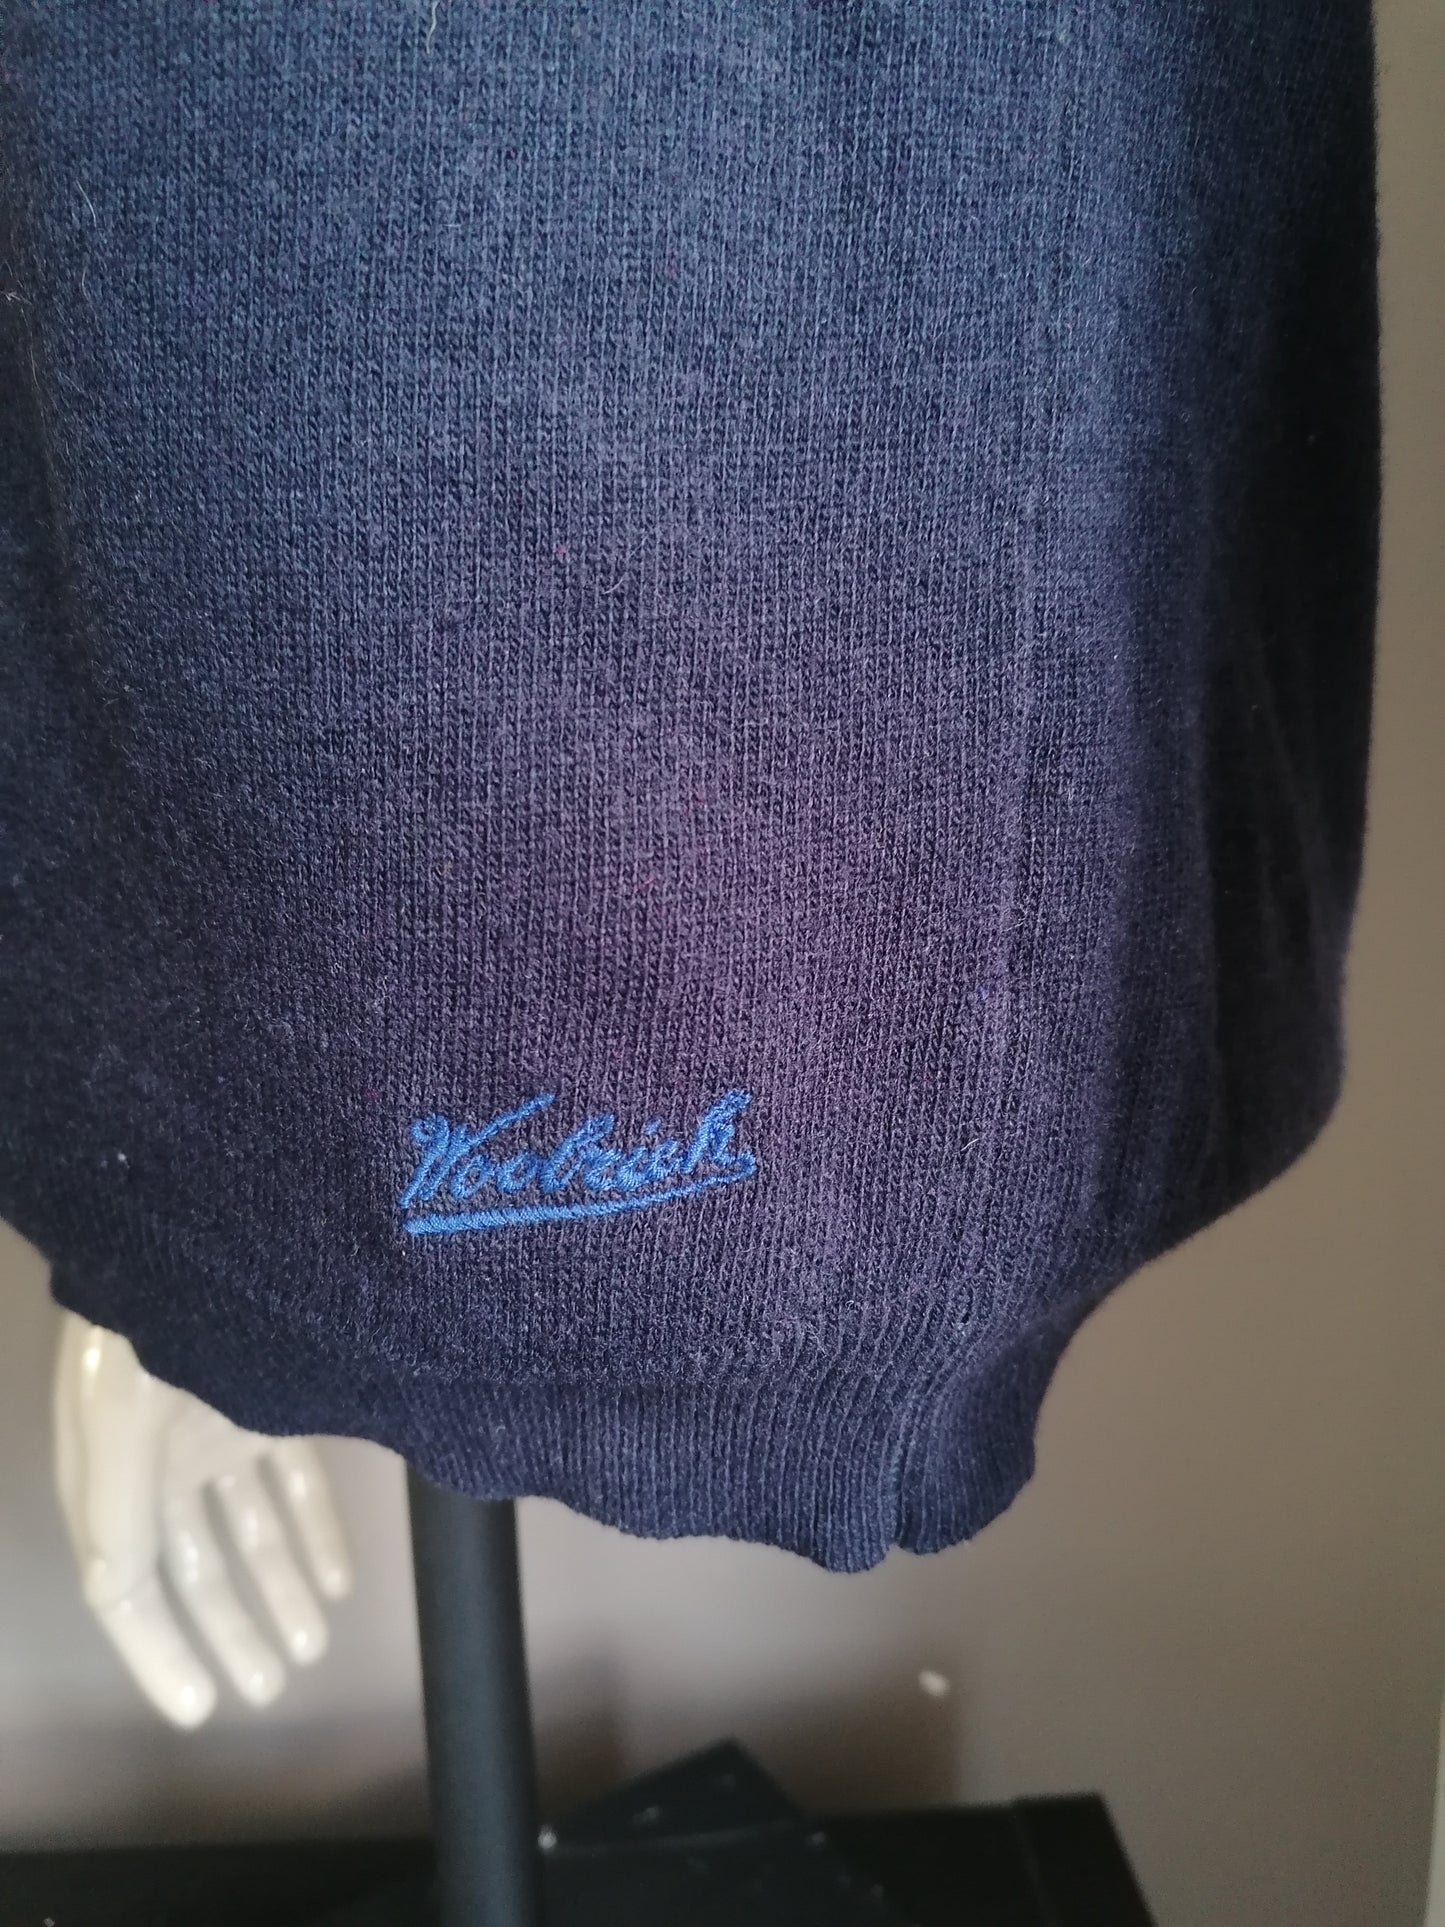 Woolrich wool spencer. Dark blue colored. Size M.